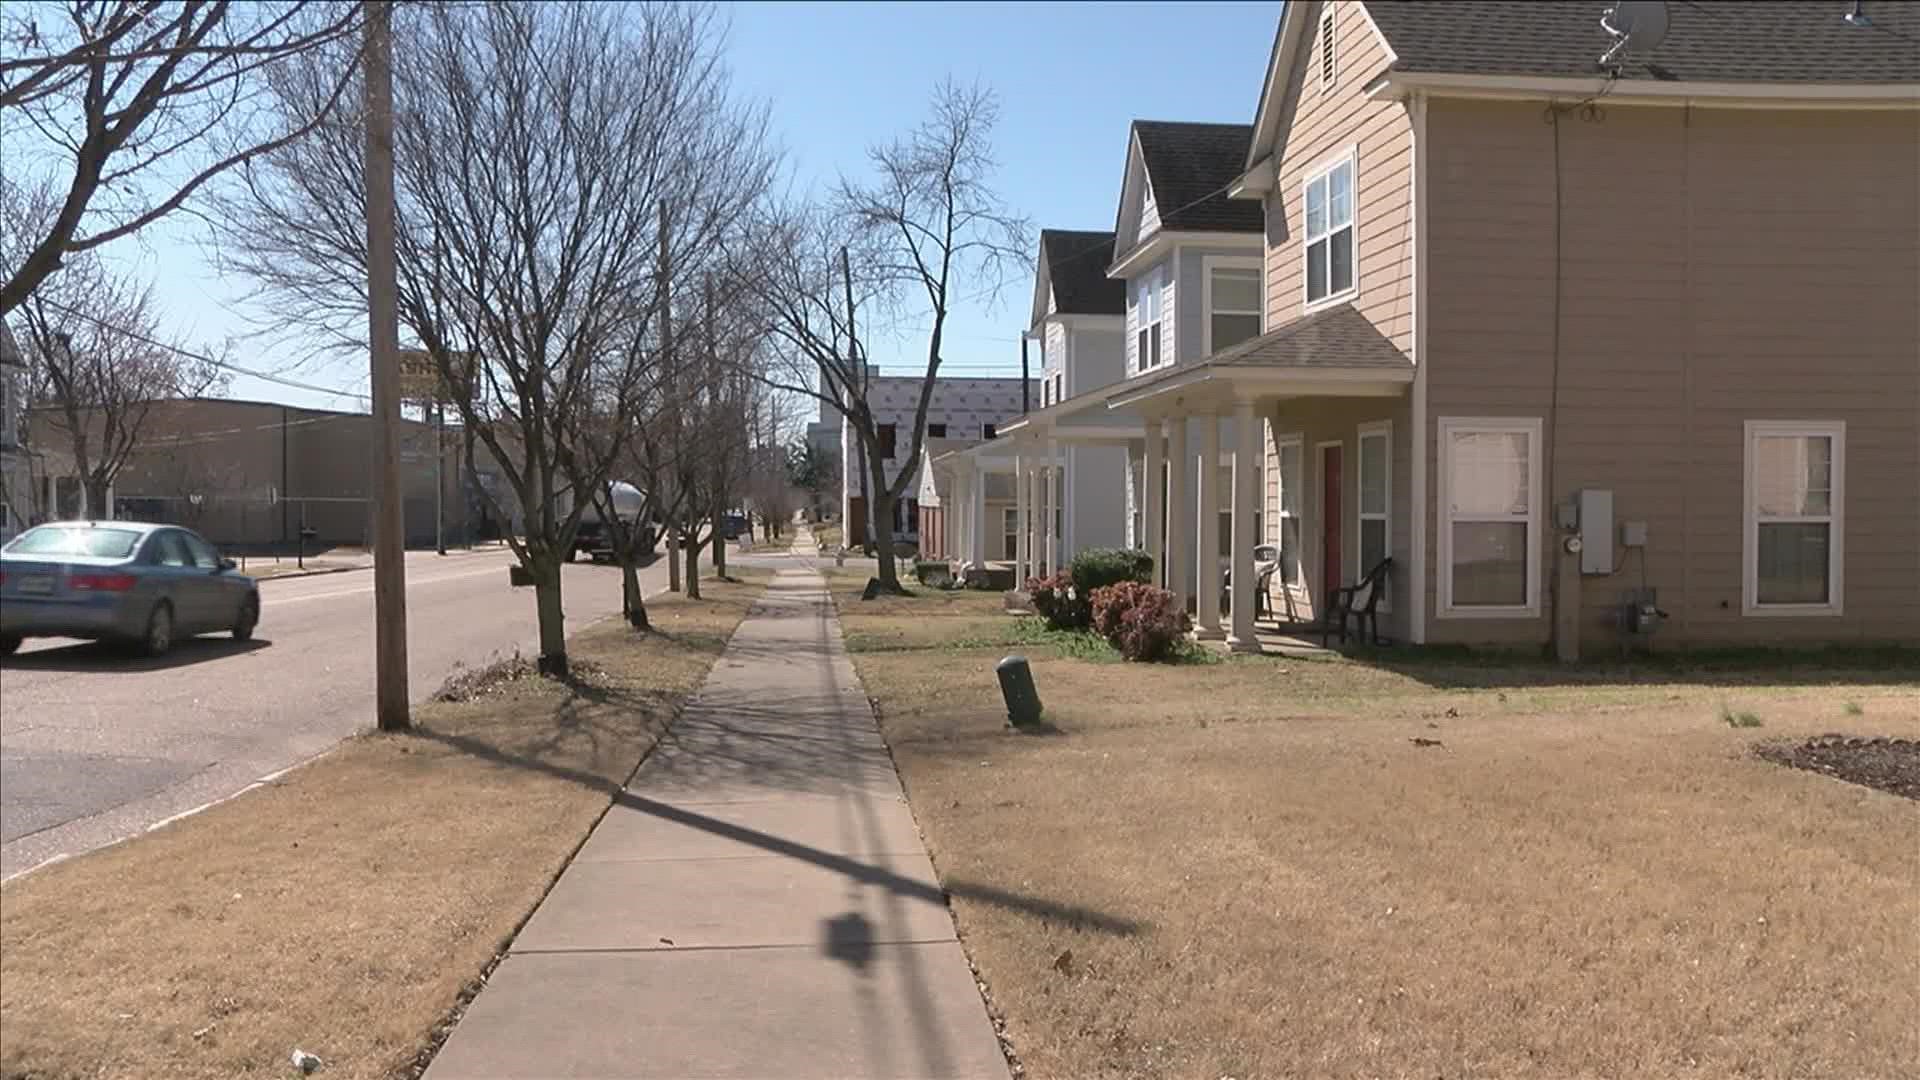 Some families can return to their same address but ABC24 learned other families won't be eligible and will be relocated elsewhere due to family downsizing.